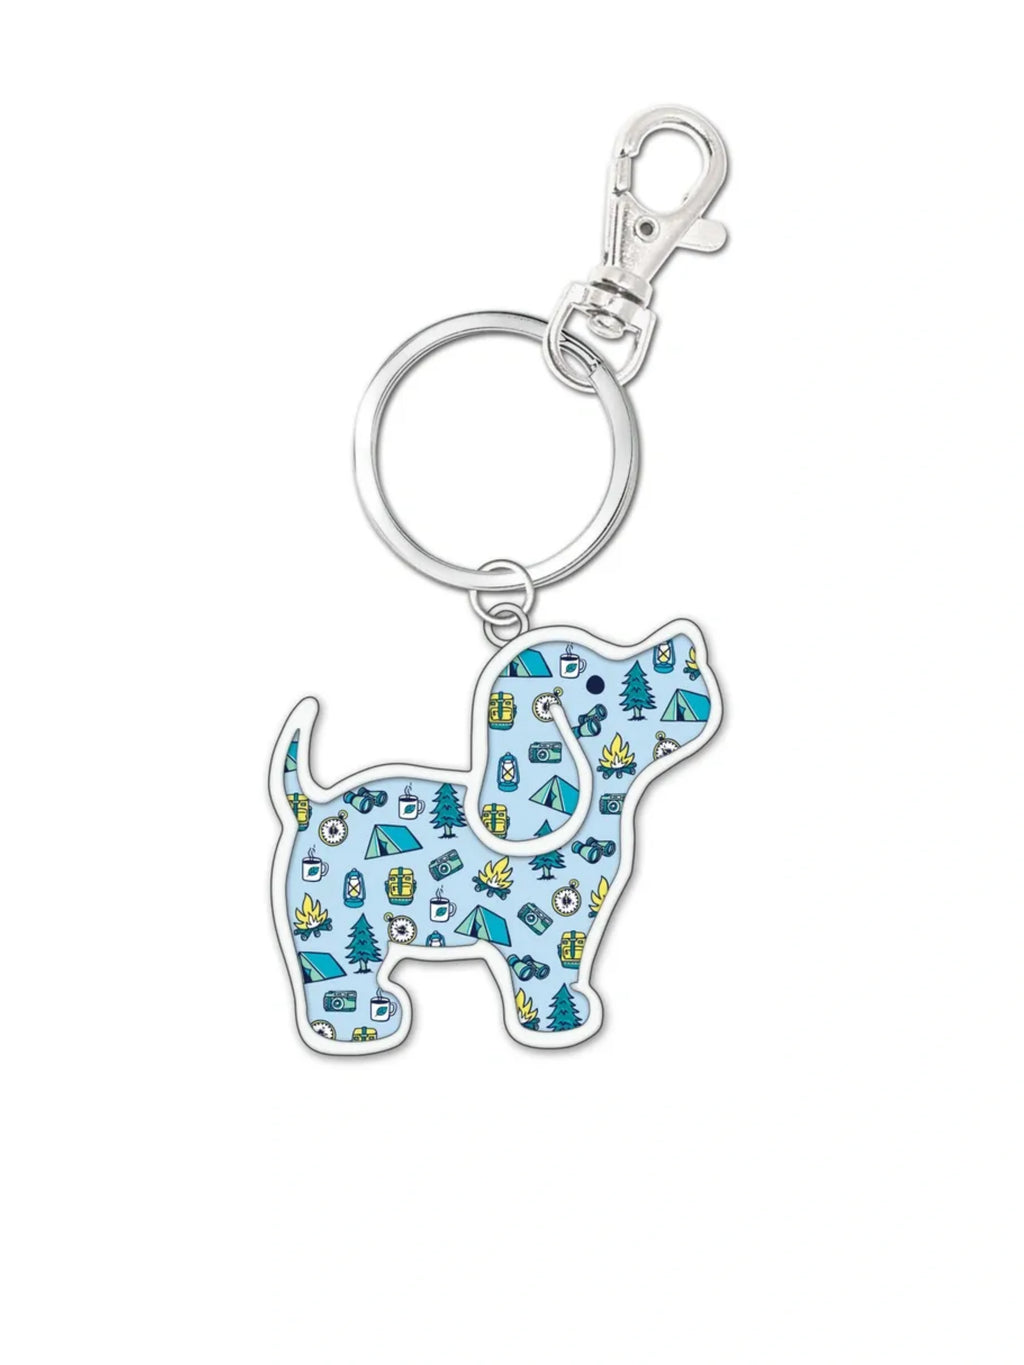 CAMPING PATTERN PUP KEY RING - Puppie Love